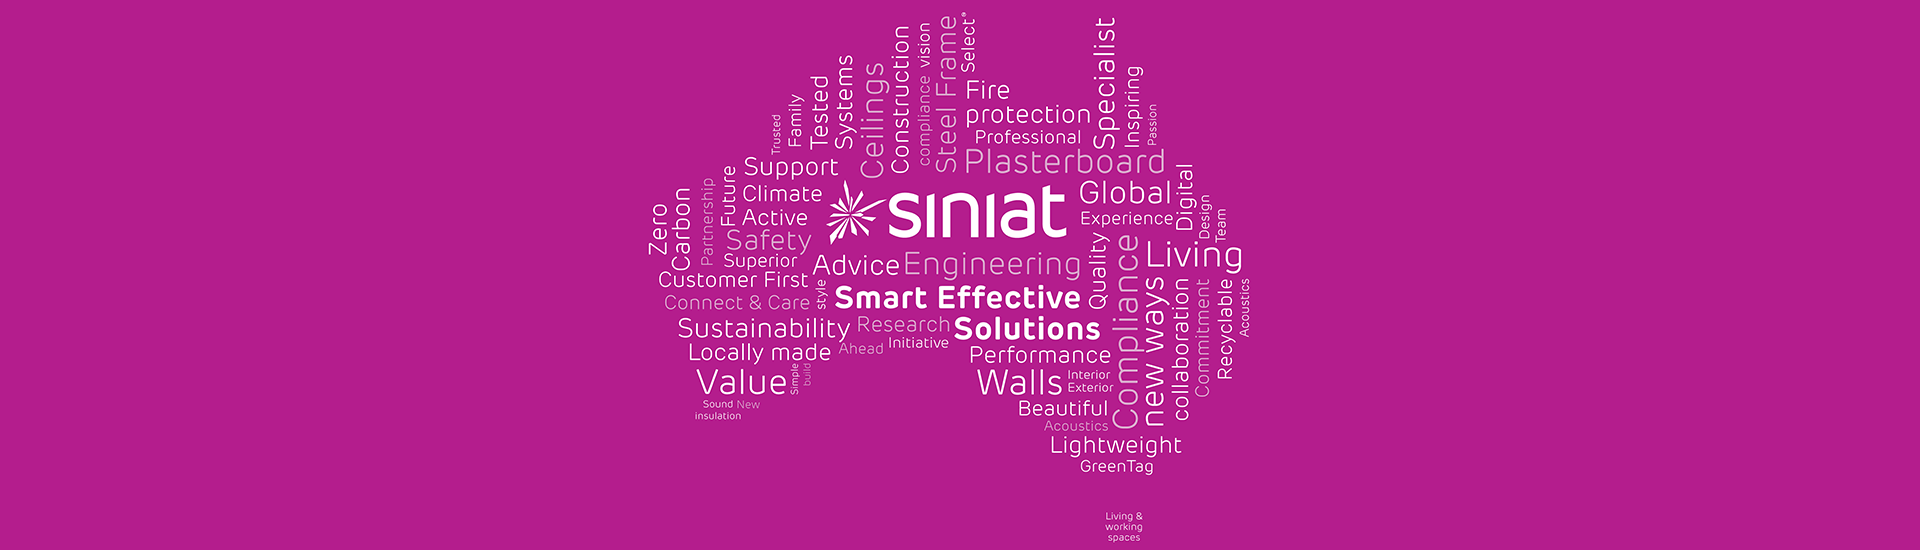 Siniat About Us Banner